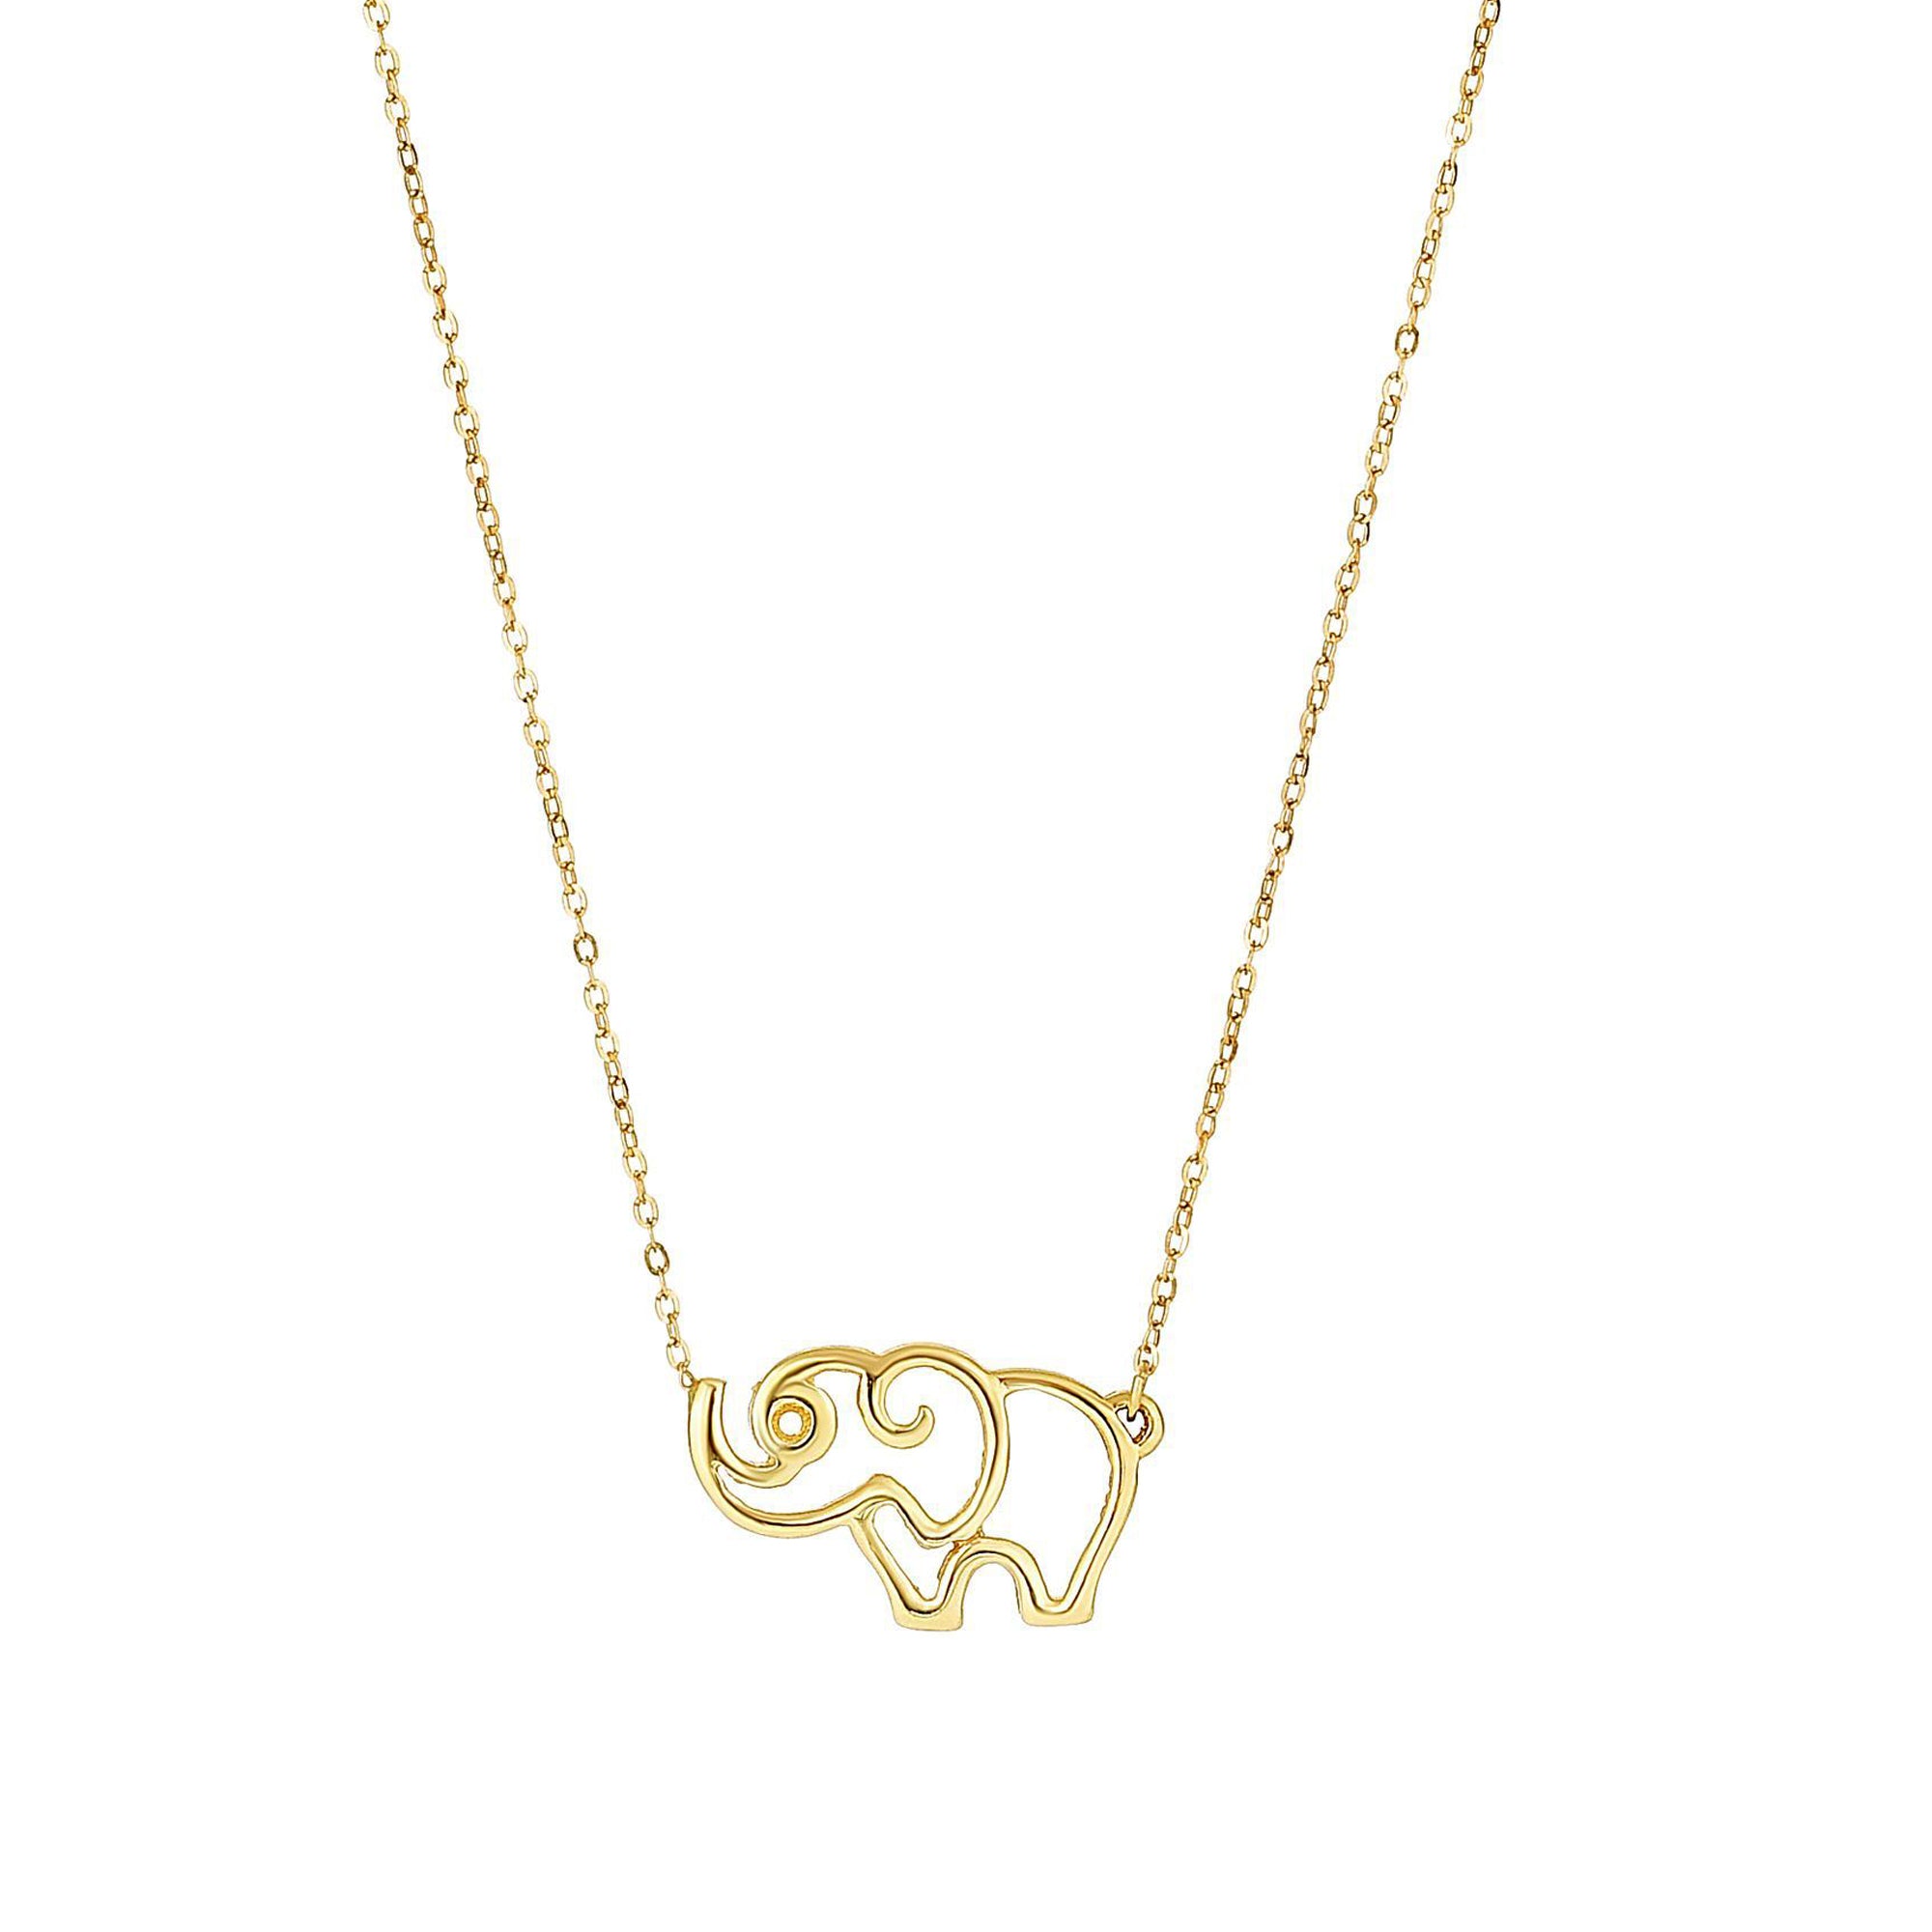 14k Yellow Gold Polished Elephant Silhouette Pendant Oval Cable Chain Necklace, 17" fine designer jewelry for men and women